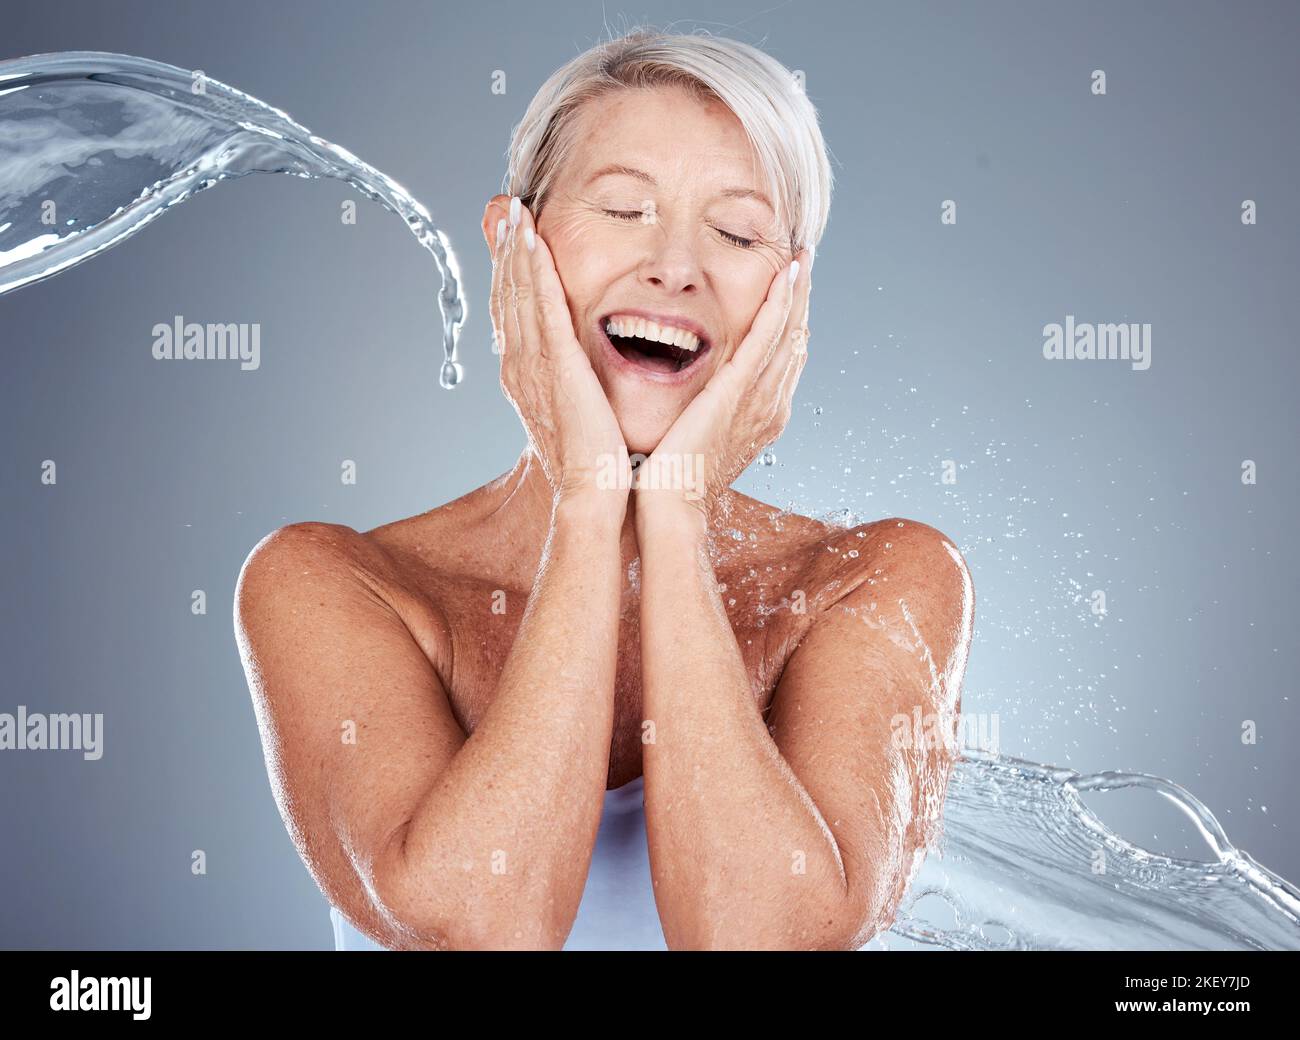 Mature woman, water and splash with shower for clean aesthetic health on a grey background. Beauty, bath and hygiene with a woman washing for bodycare Stock Photo